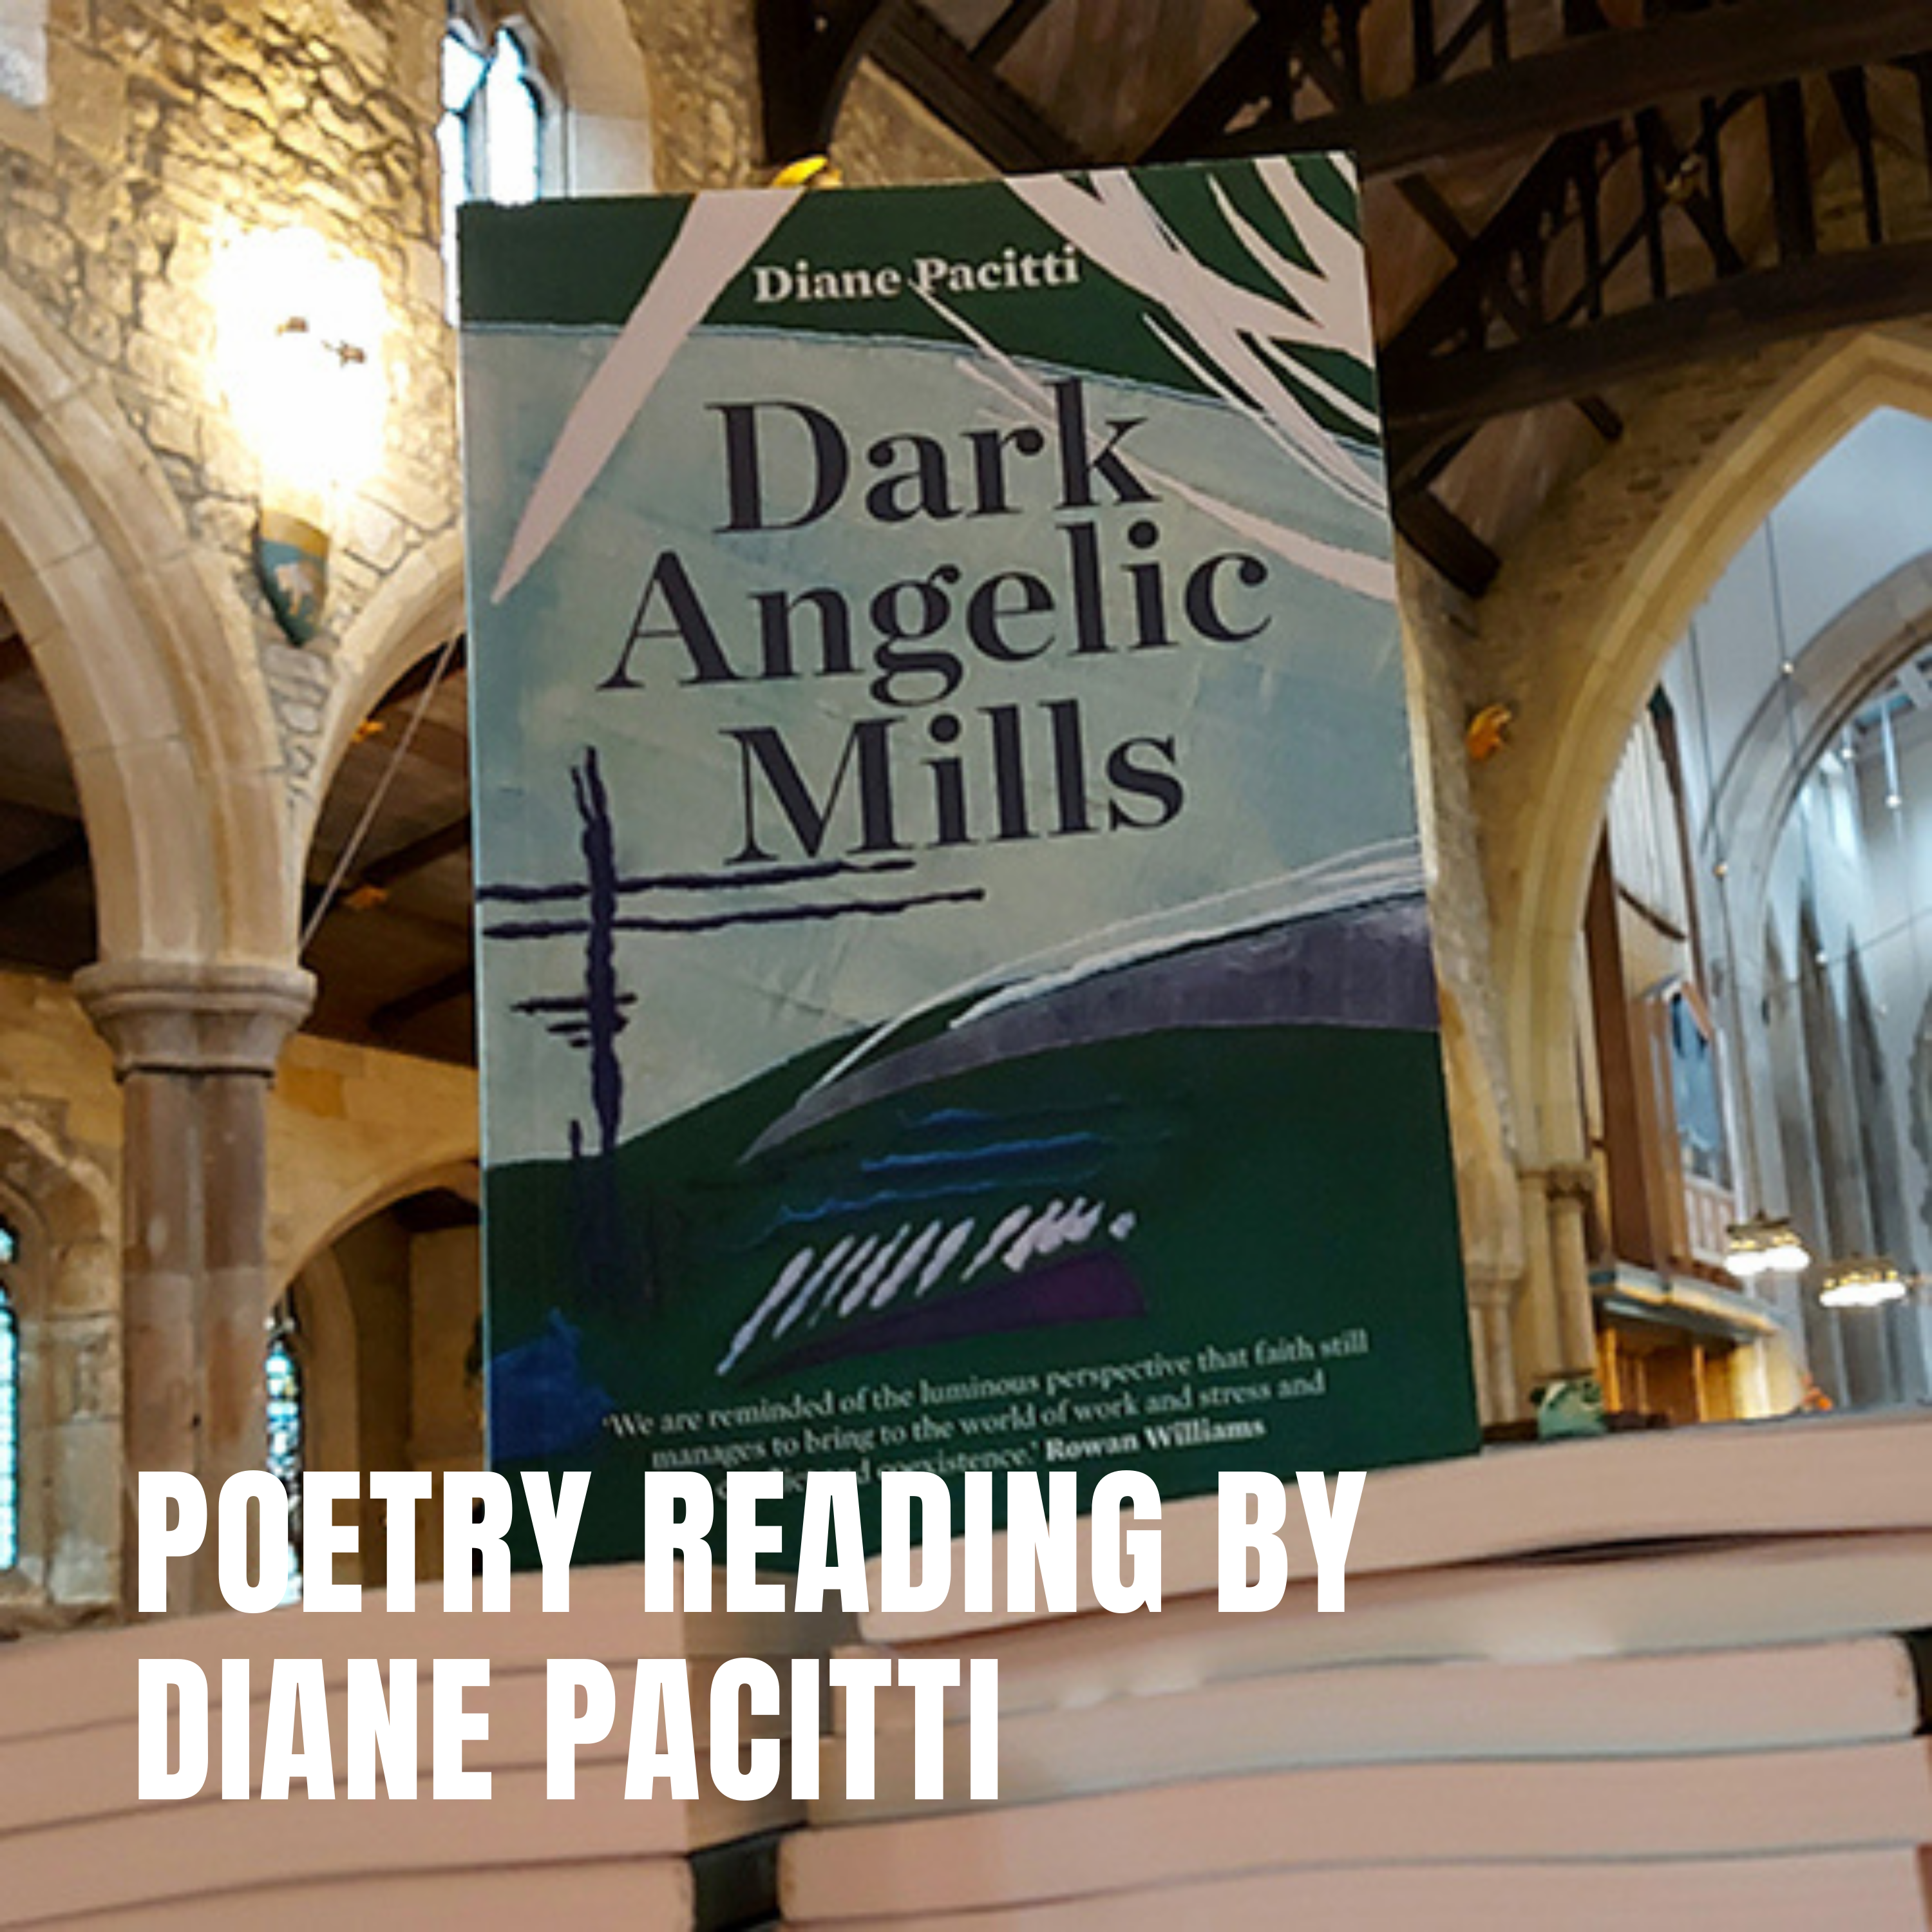 Poetry reading by Diane Pacitti